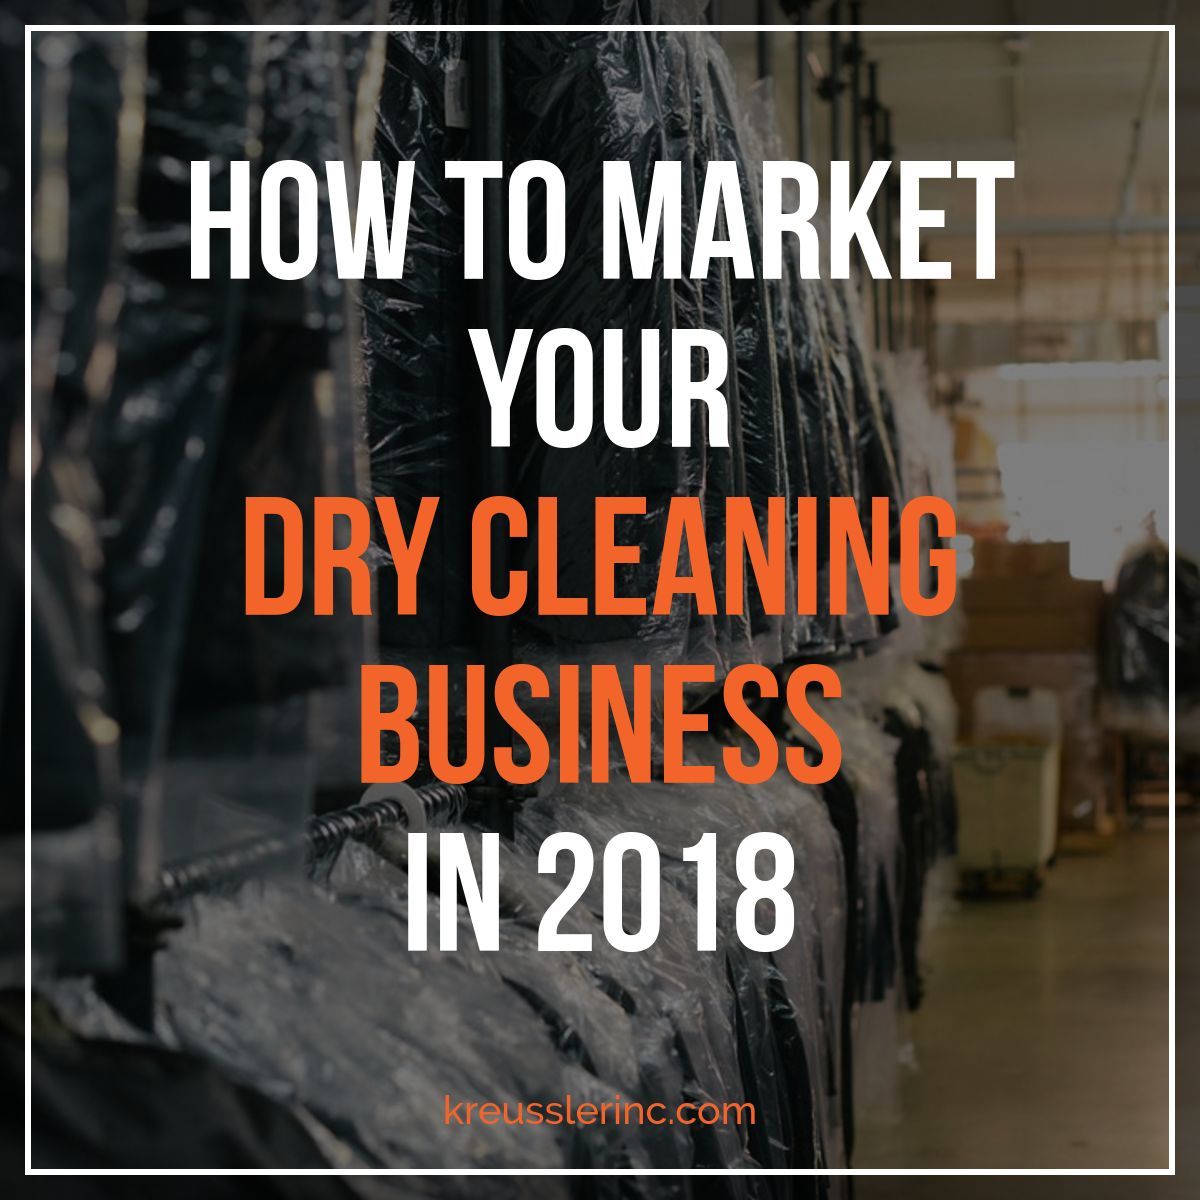 How to market your dry cleaning business